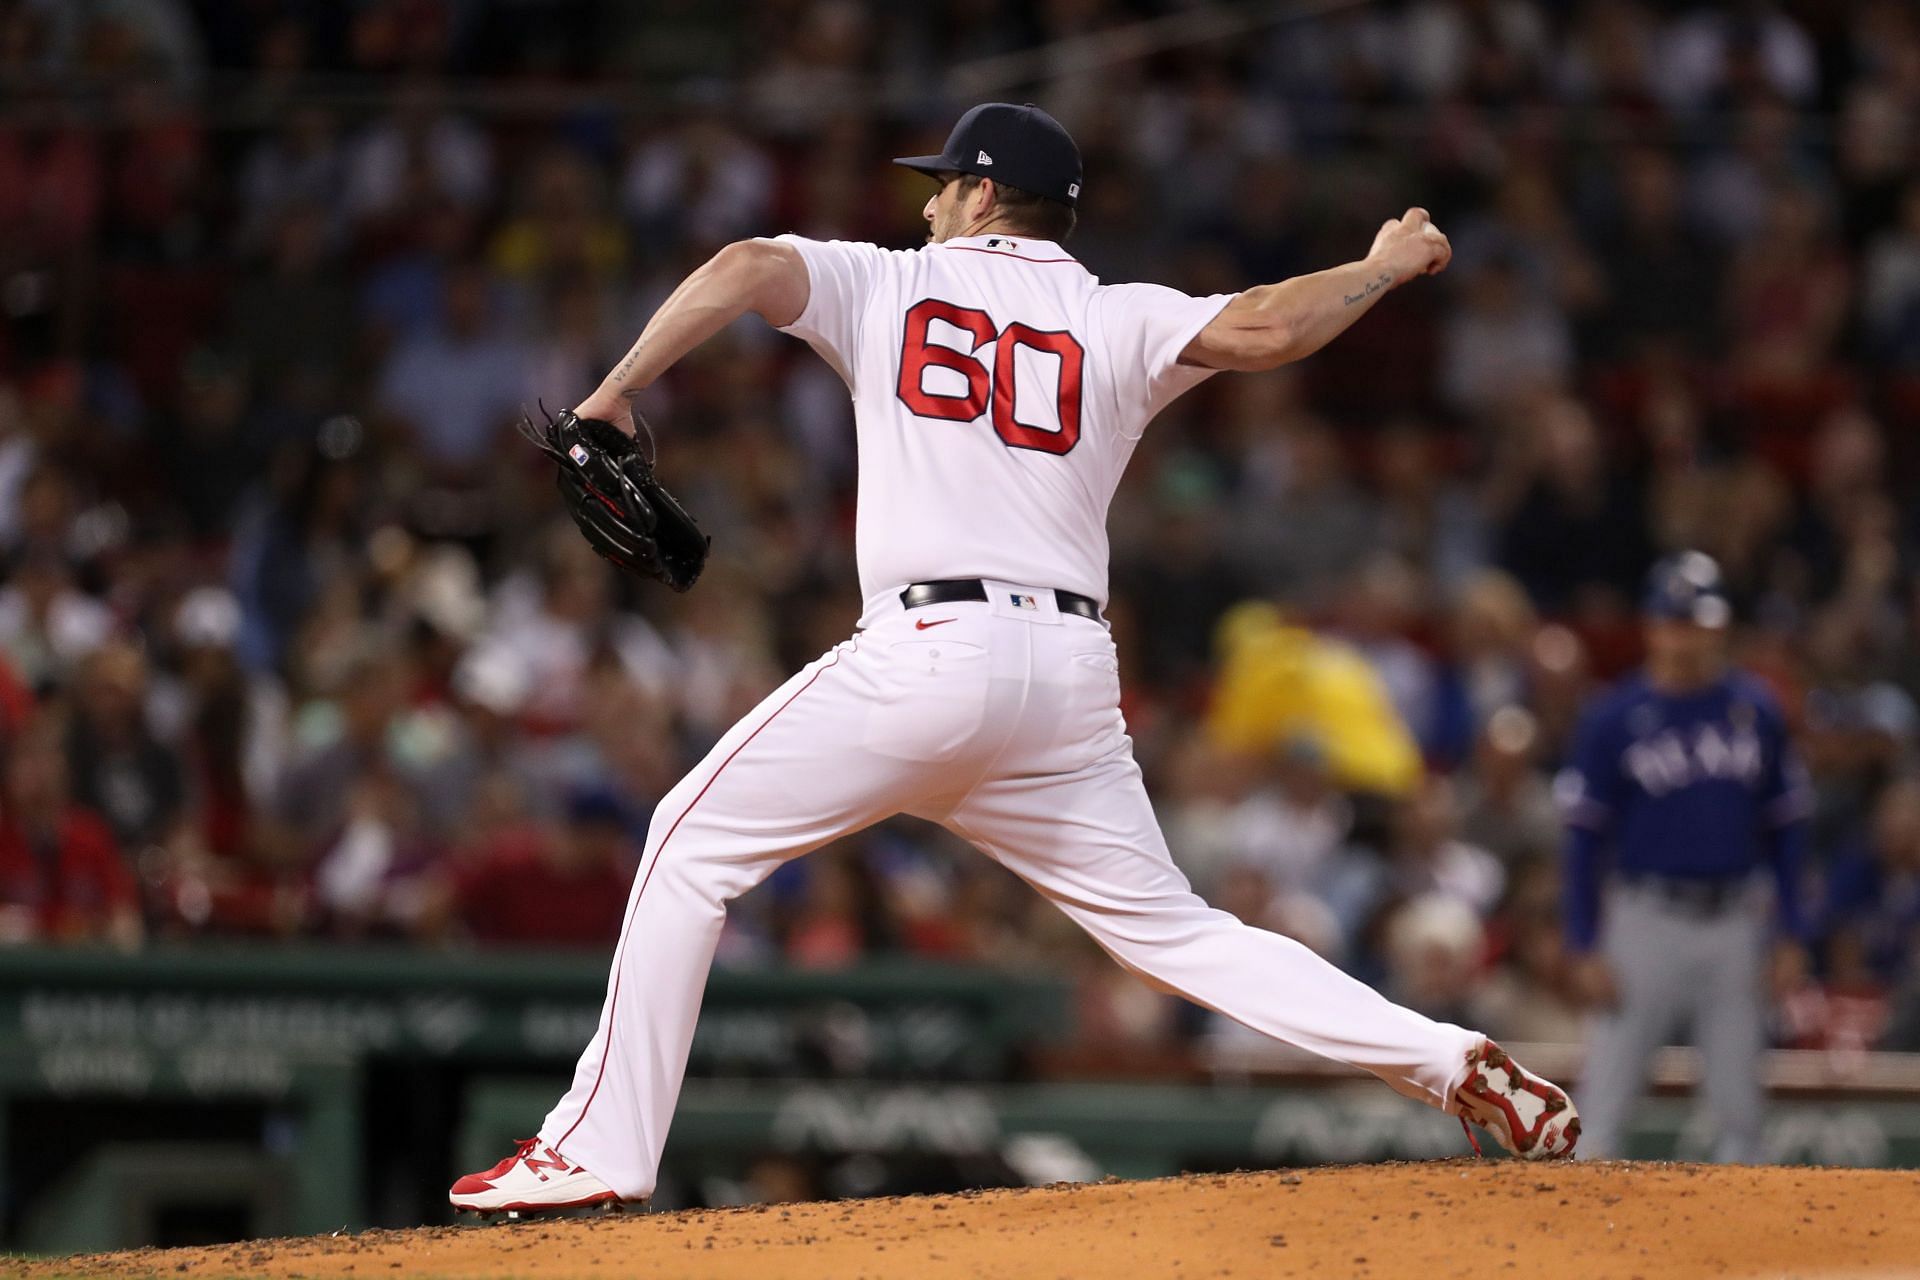 Tyler Danish delivers a pitch during the fourth inning against the Texas Rangers at Fenway Park